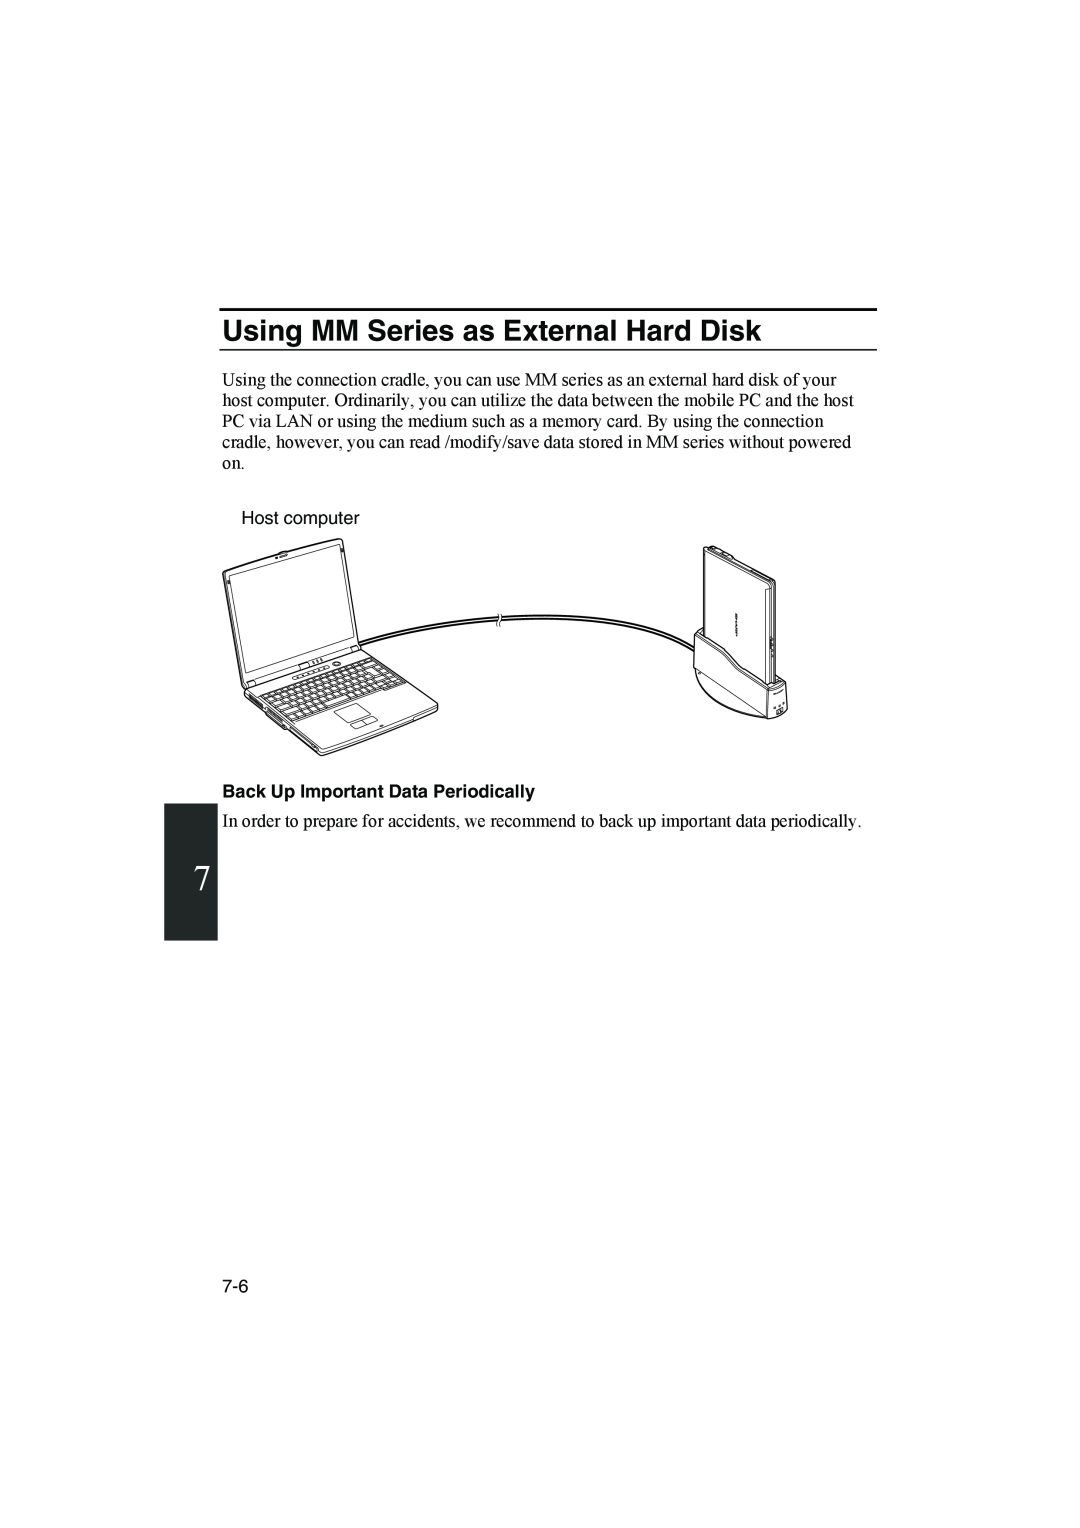 Sharp PC-MM1 manual Using MM Series as External Hard Disk, Back Up Important Data Periodically 